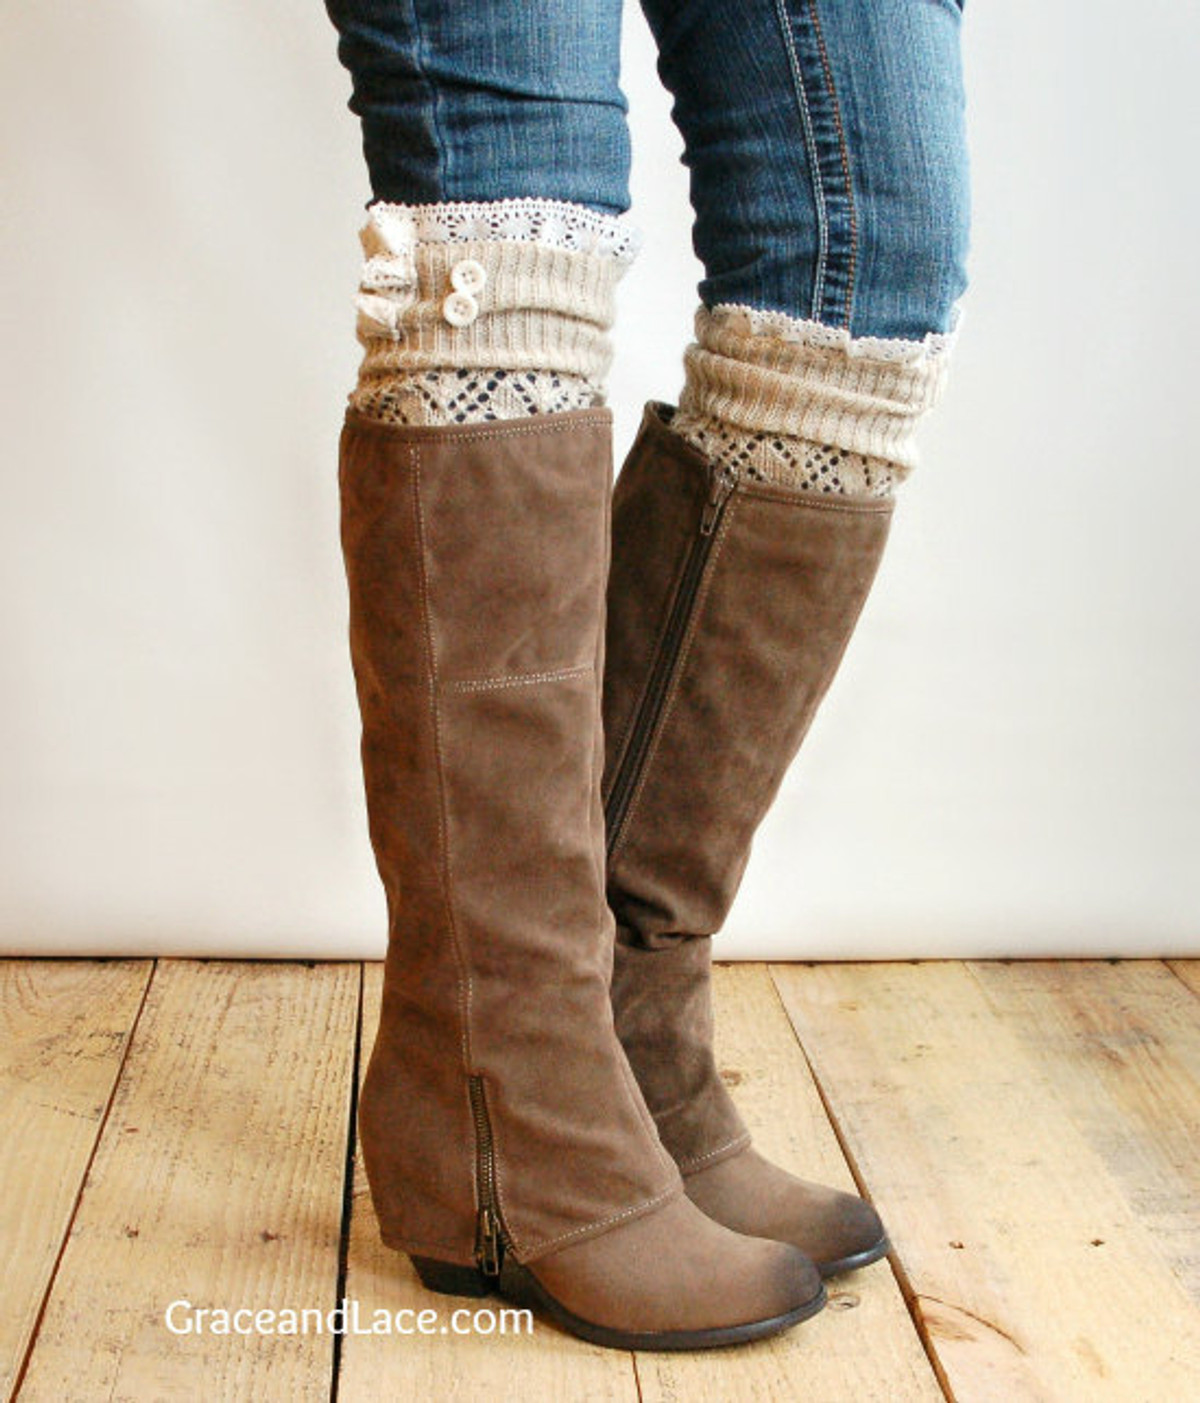 Grace and Lace The Lacey Lou Boot Cuff Leg Warmer - Tan - Sublime Boutique